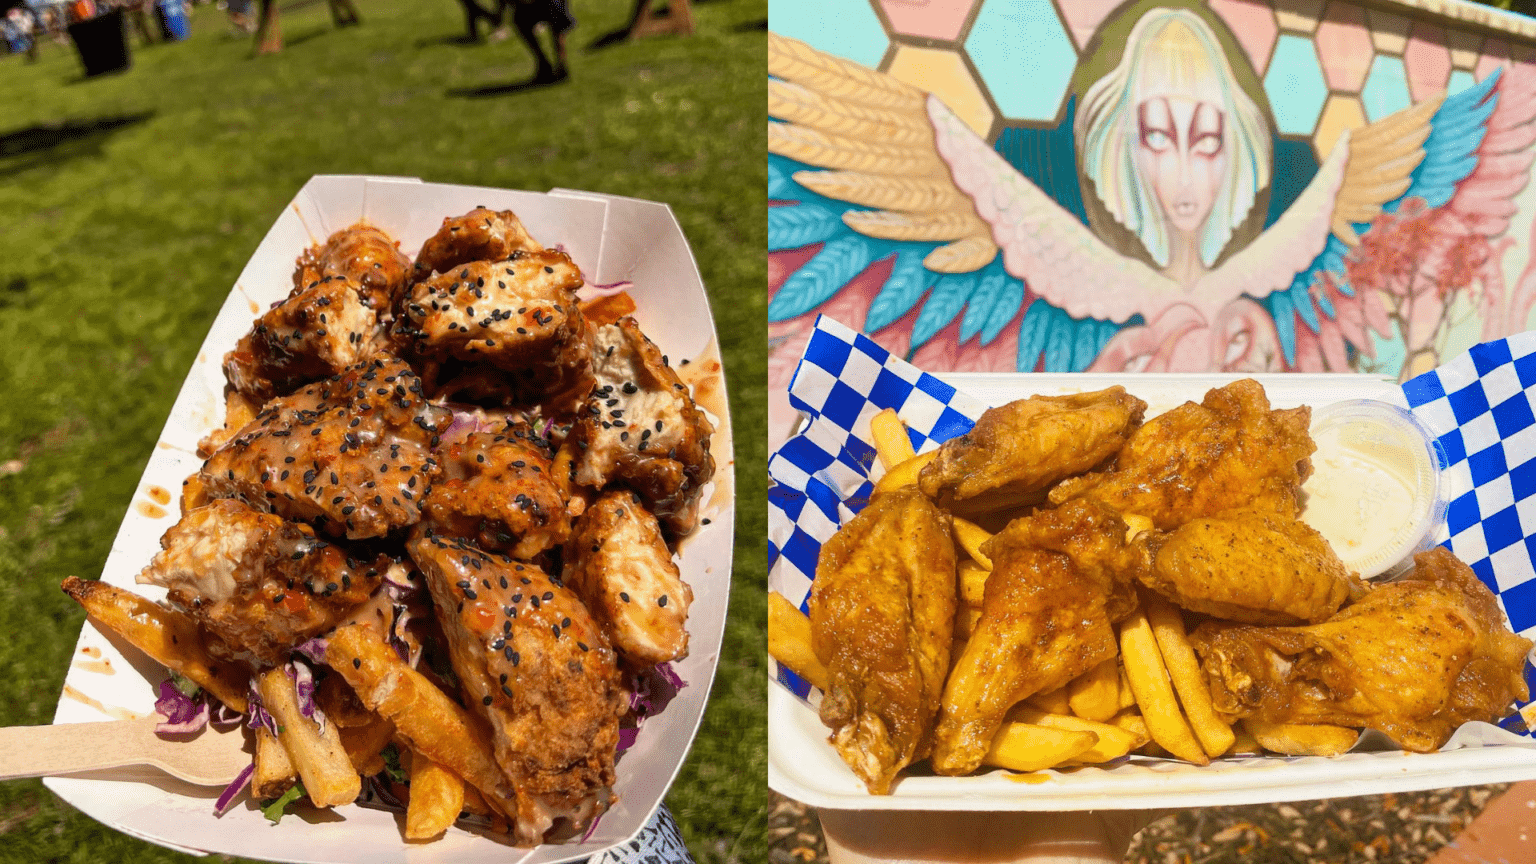 A tasty Chicken Wing Festival arrives Friday for National Chicken Wing